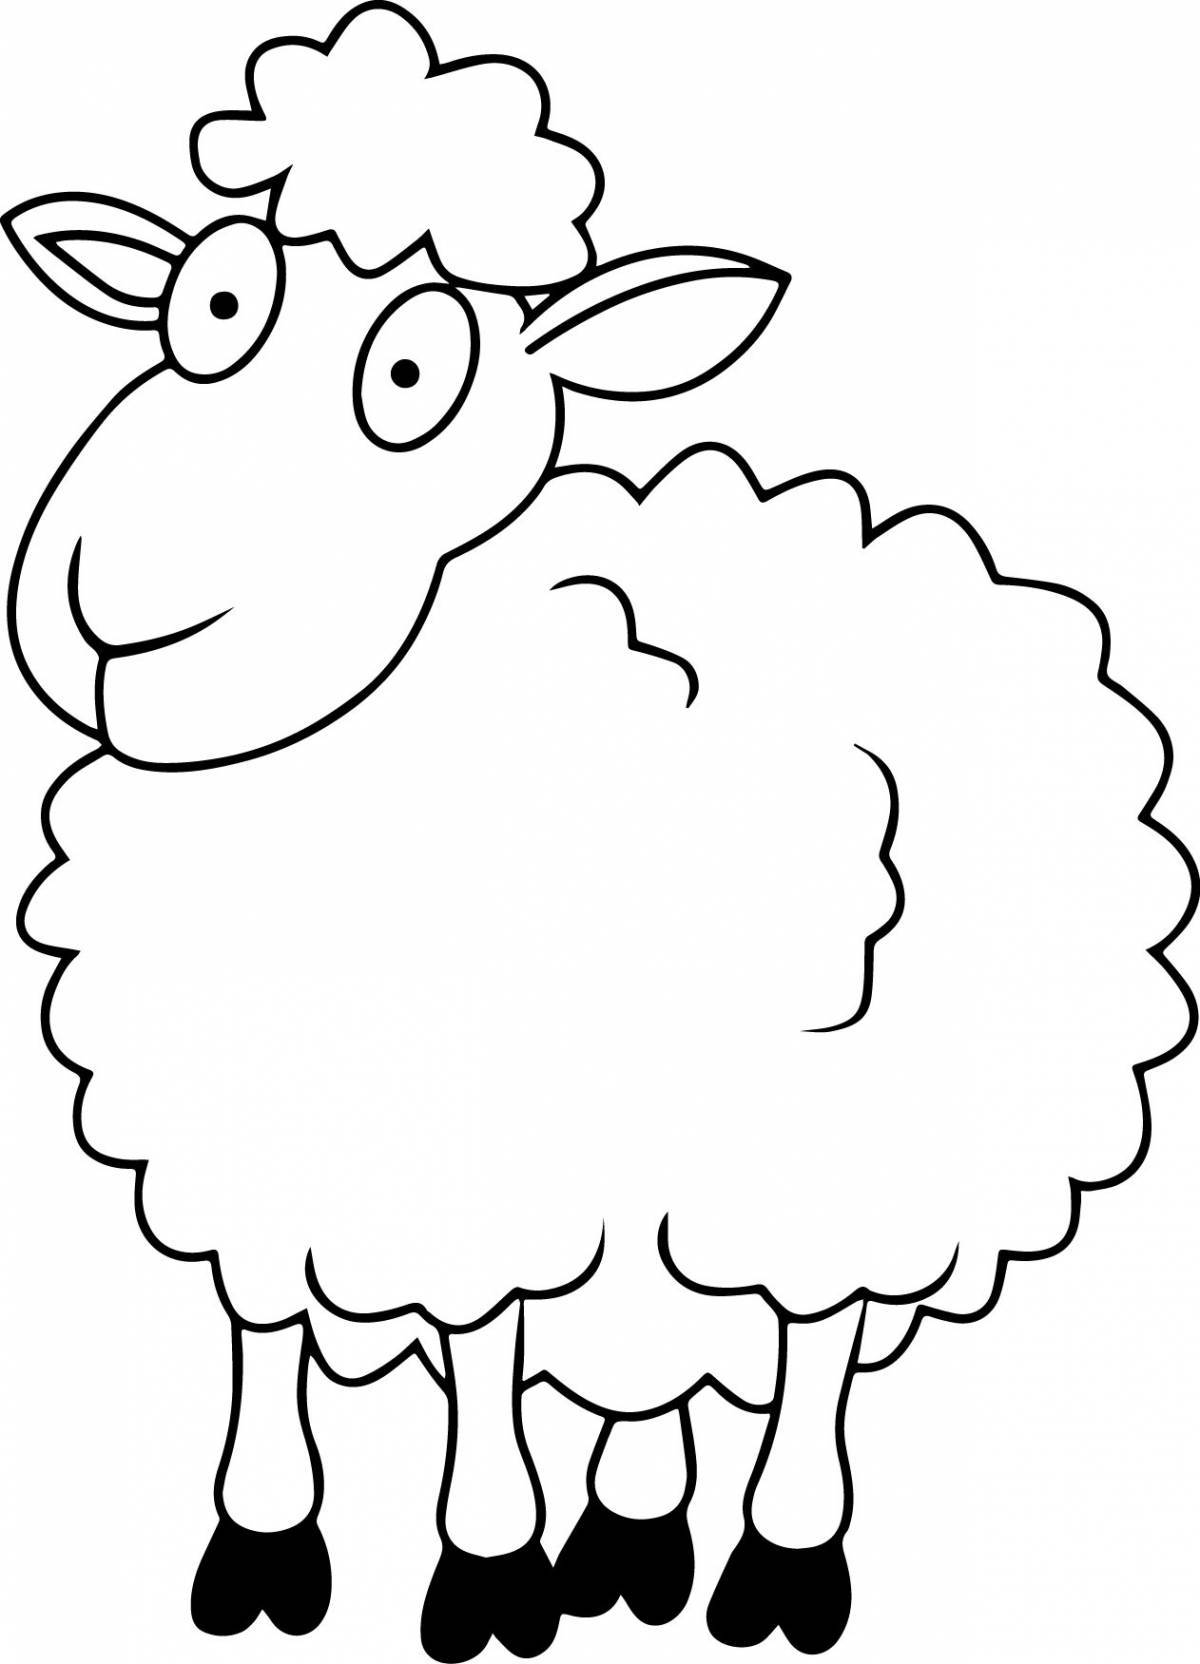 Blessed sheep coloring pages for kids